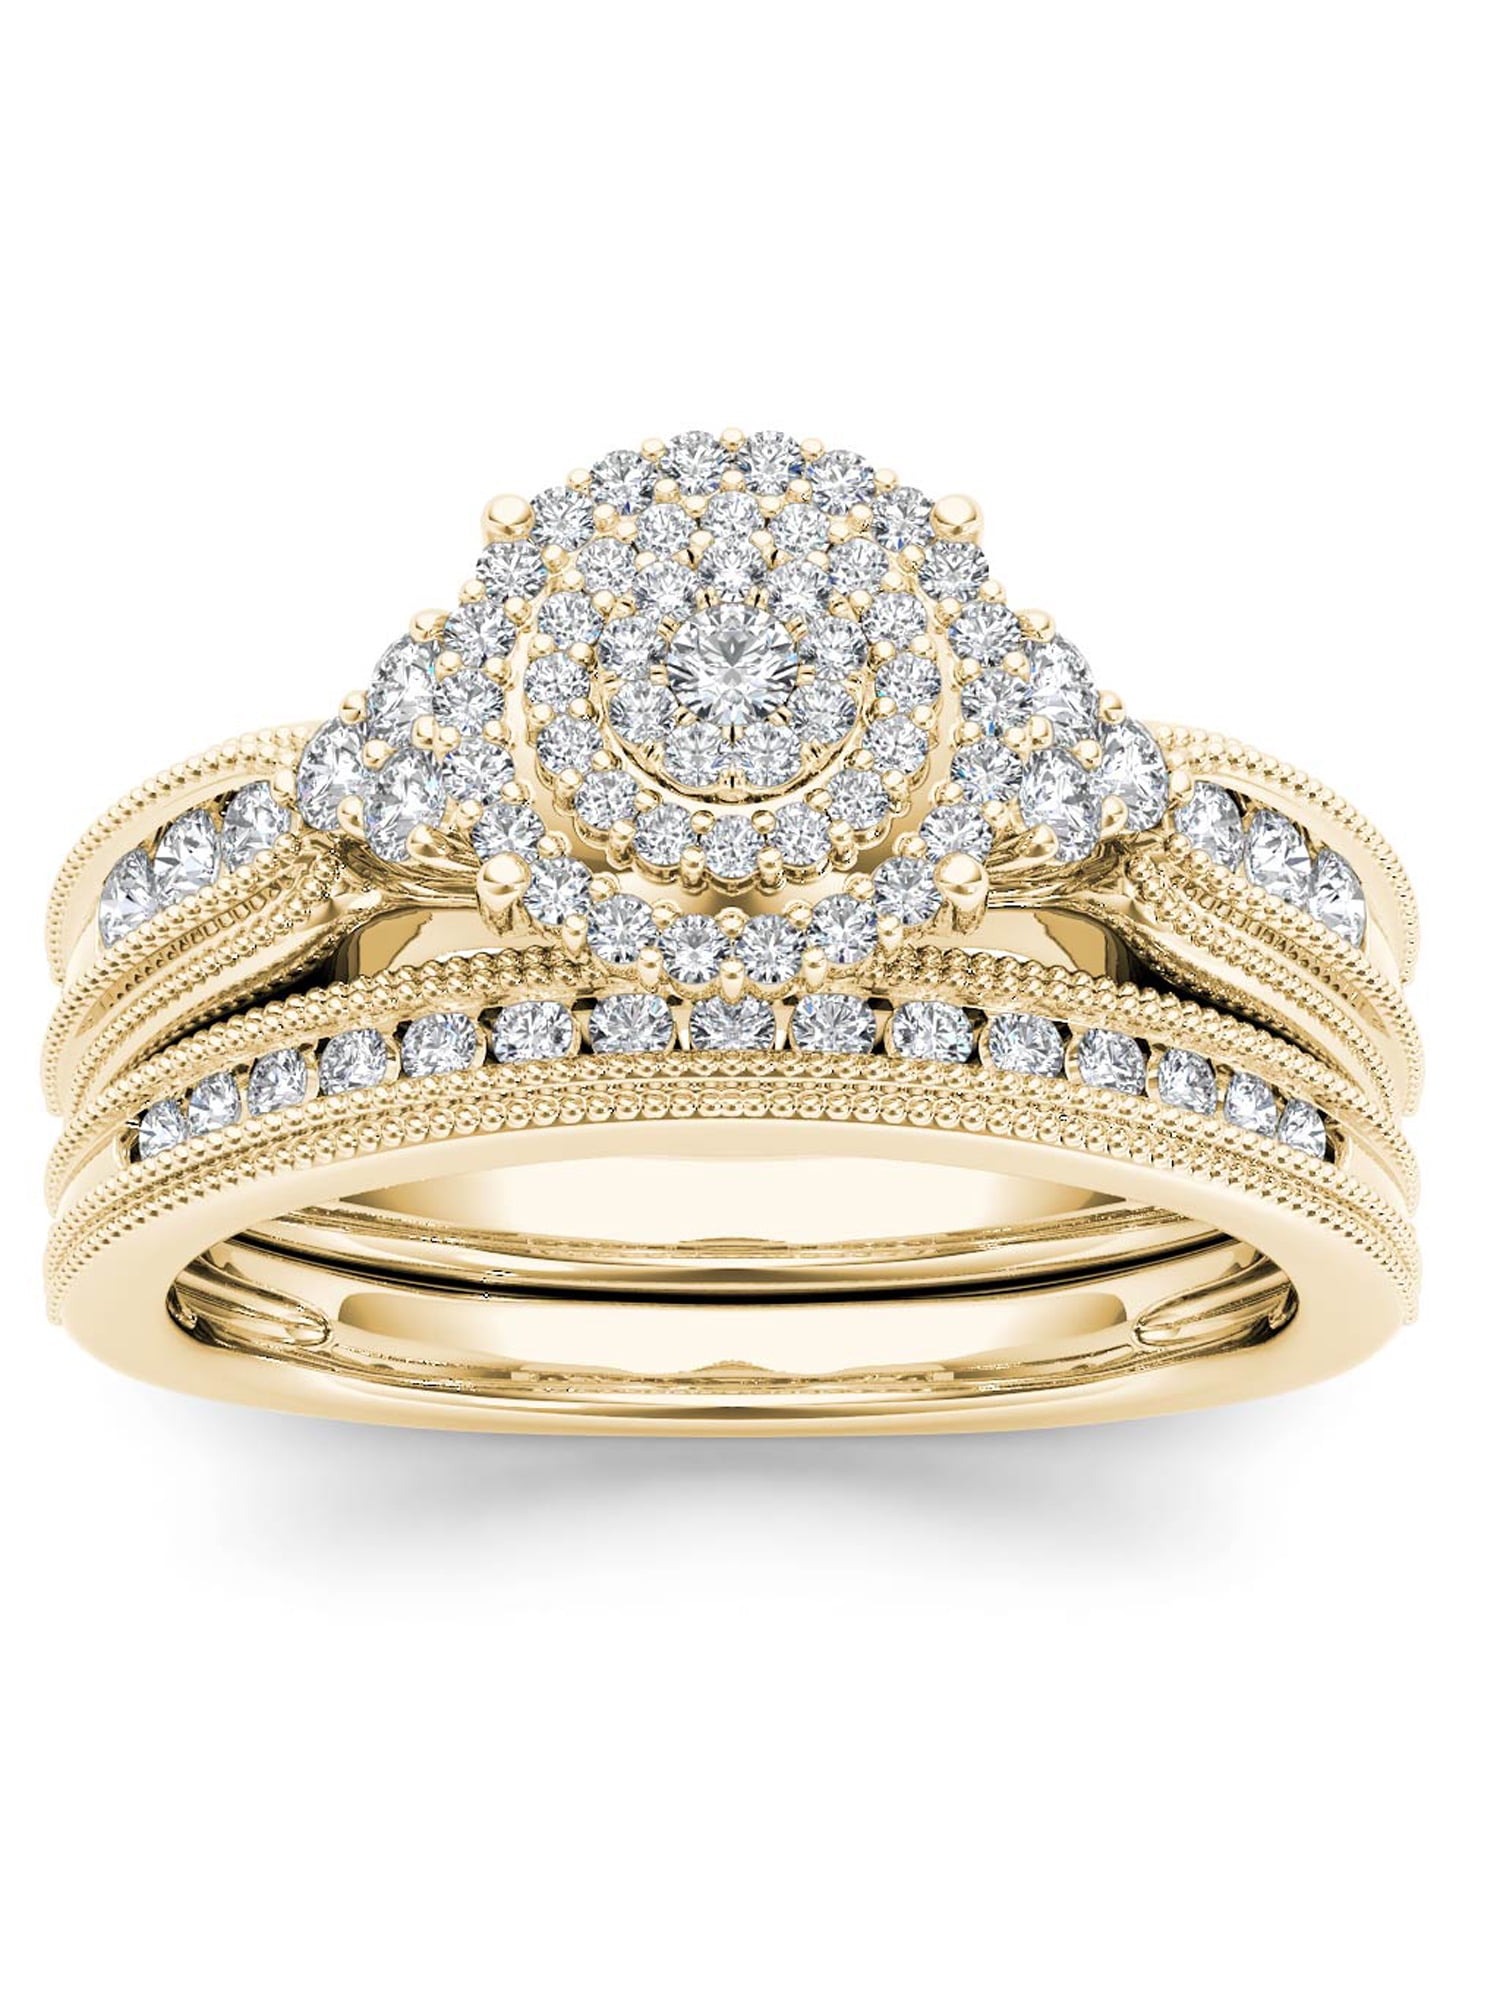 Imperial 1/2Ct TDW Diamond 14k Yellow Gold Cluster Halo Vintage Style ...